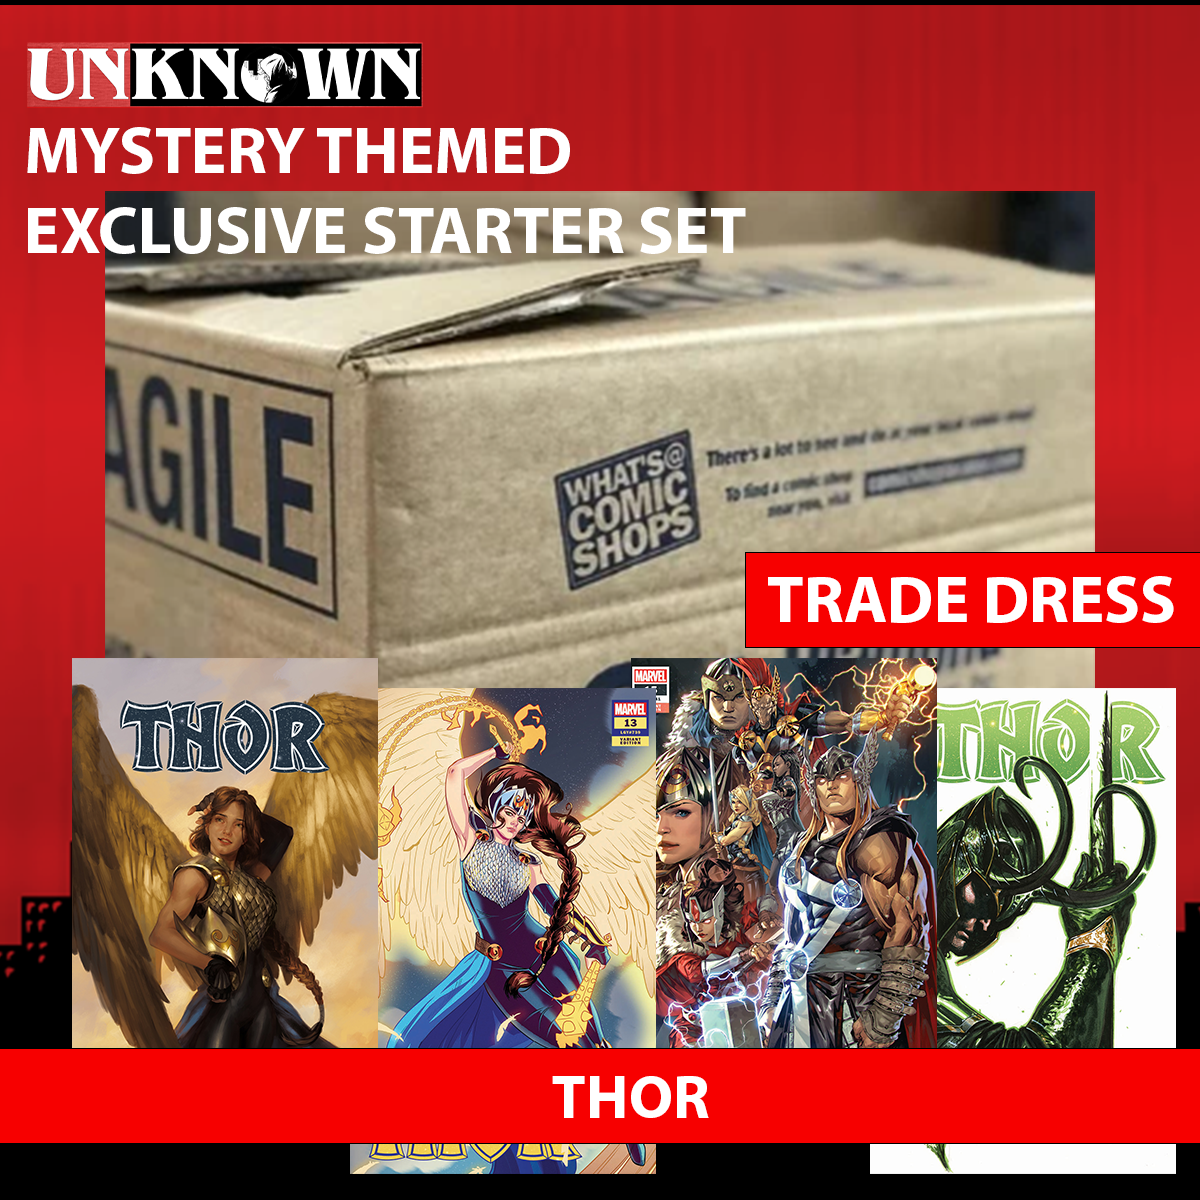 UNKNOWN COMICS MYSTERY THEMED 👉THOR STORE EXCLUSIVE STARTER SET: MIXED CASE OF EXCLUSIVE COMIC BOOKS 👉TRADE DRESS ESTIMATED 120-200 COMICS (12/06/2023)